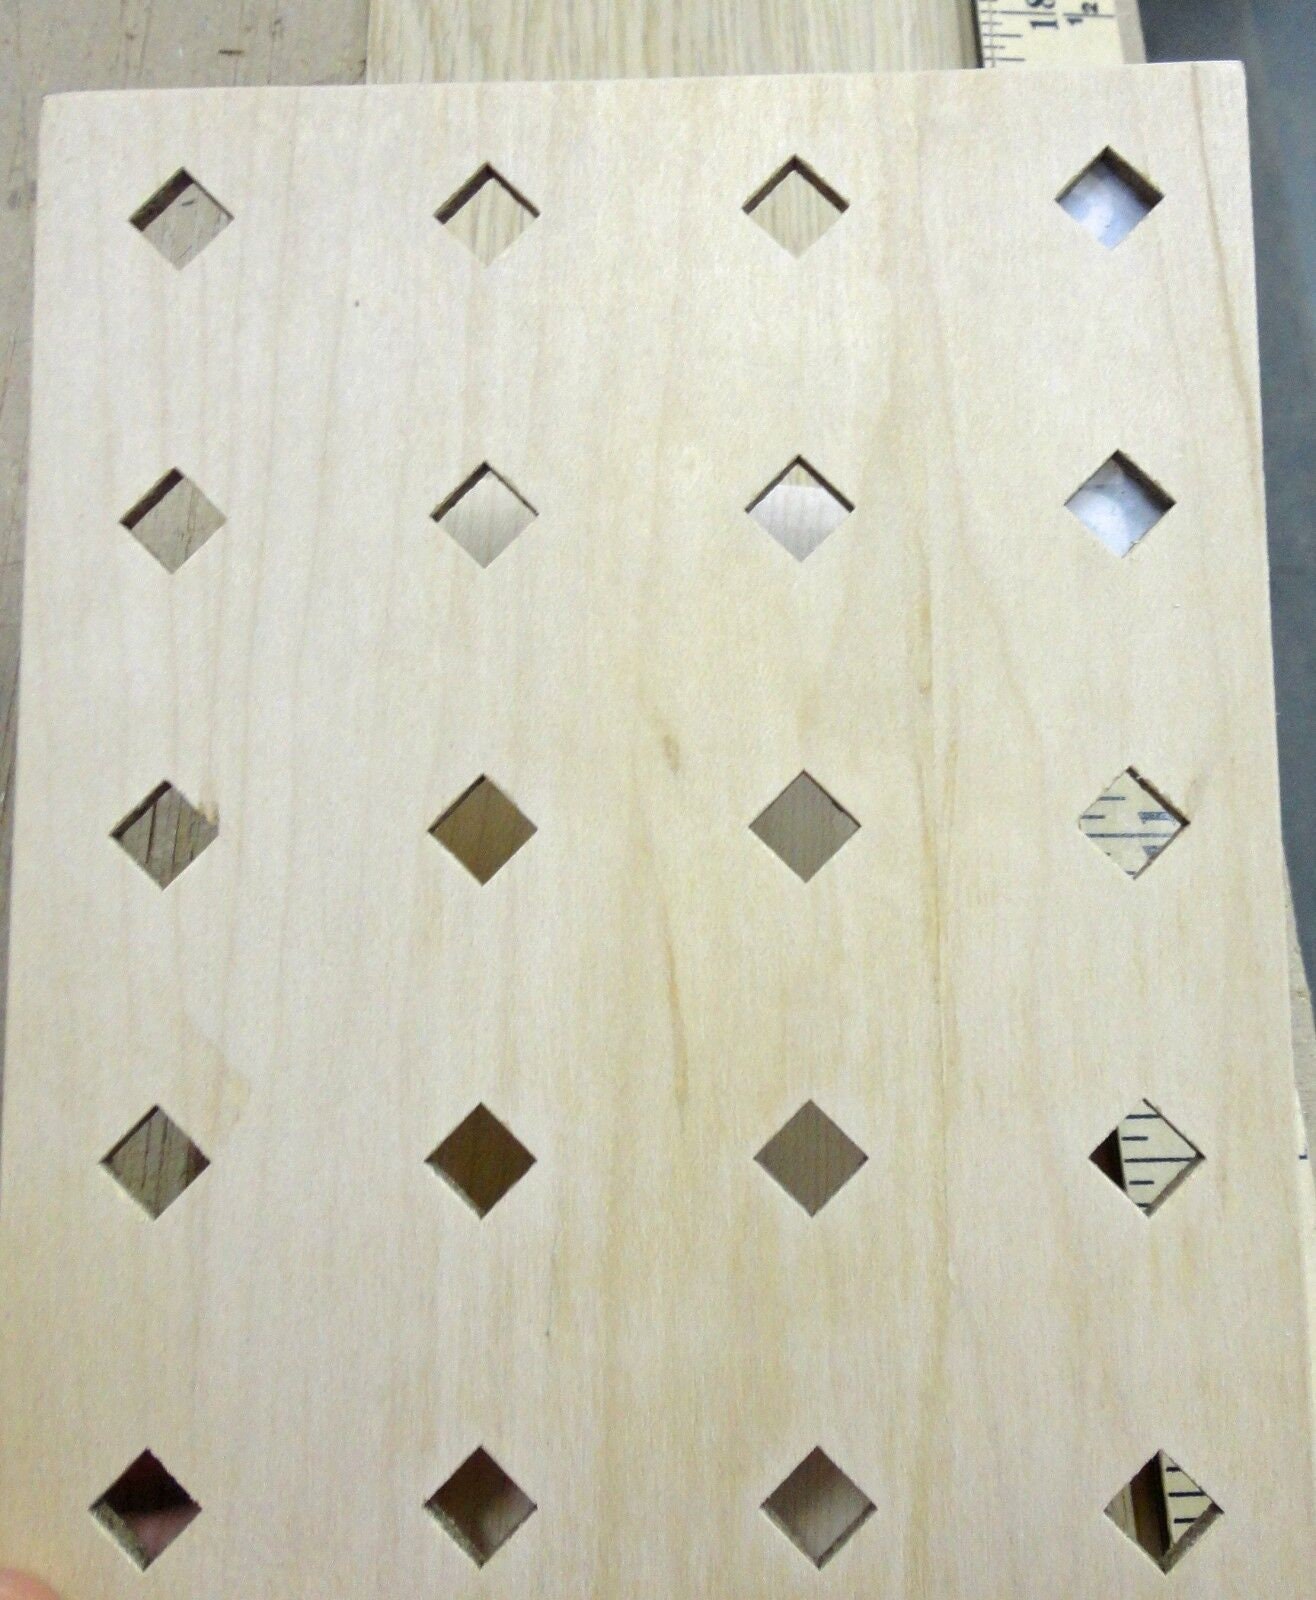 Laser Ready Wood, Maple, Wood for Laser, Craft Wood, FINISHED Maple 1/4 6mm  MDF Core 2-sided Hardwood Plywood Veneer, Pre-cut Laser Wood 